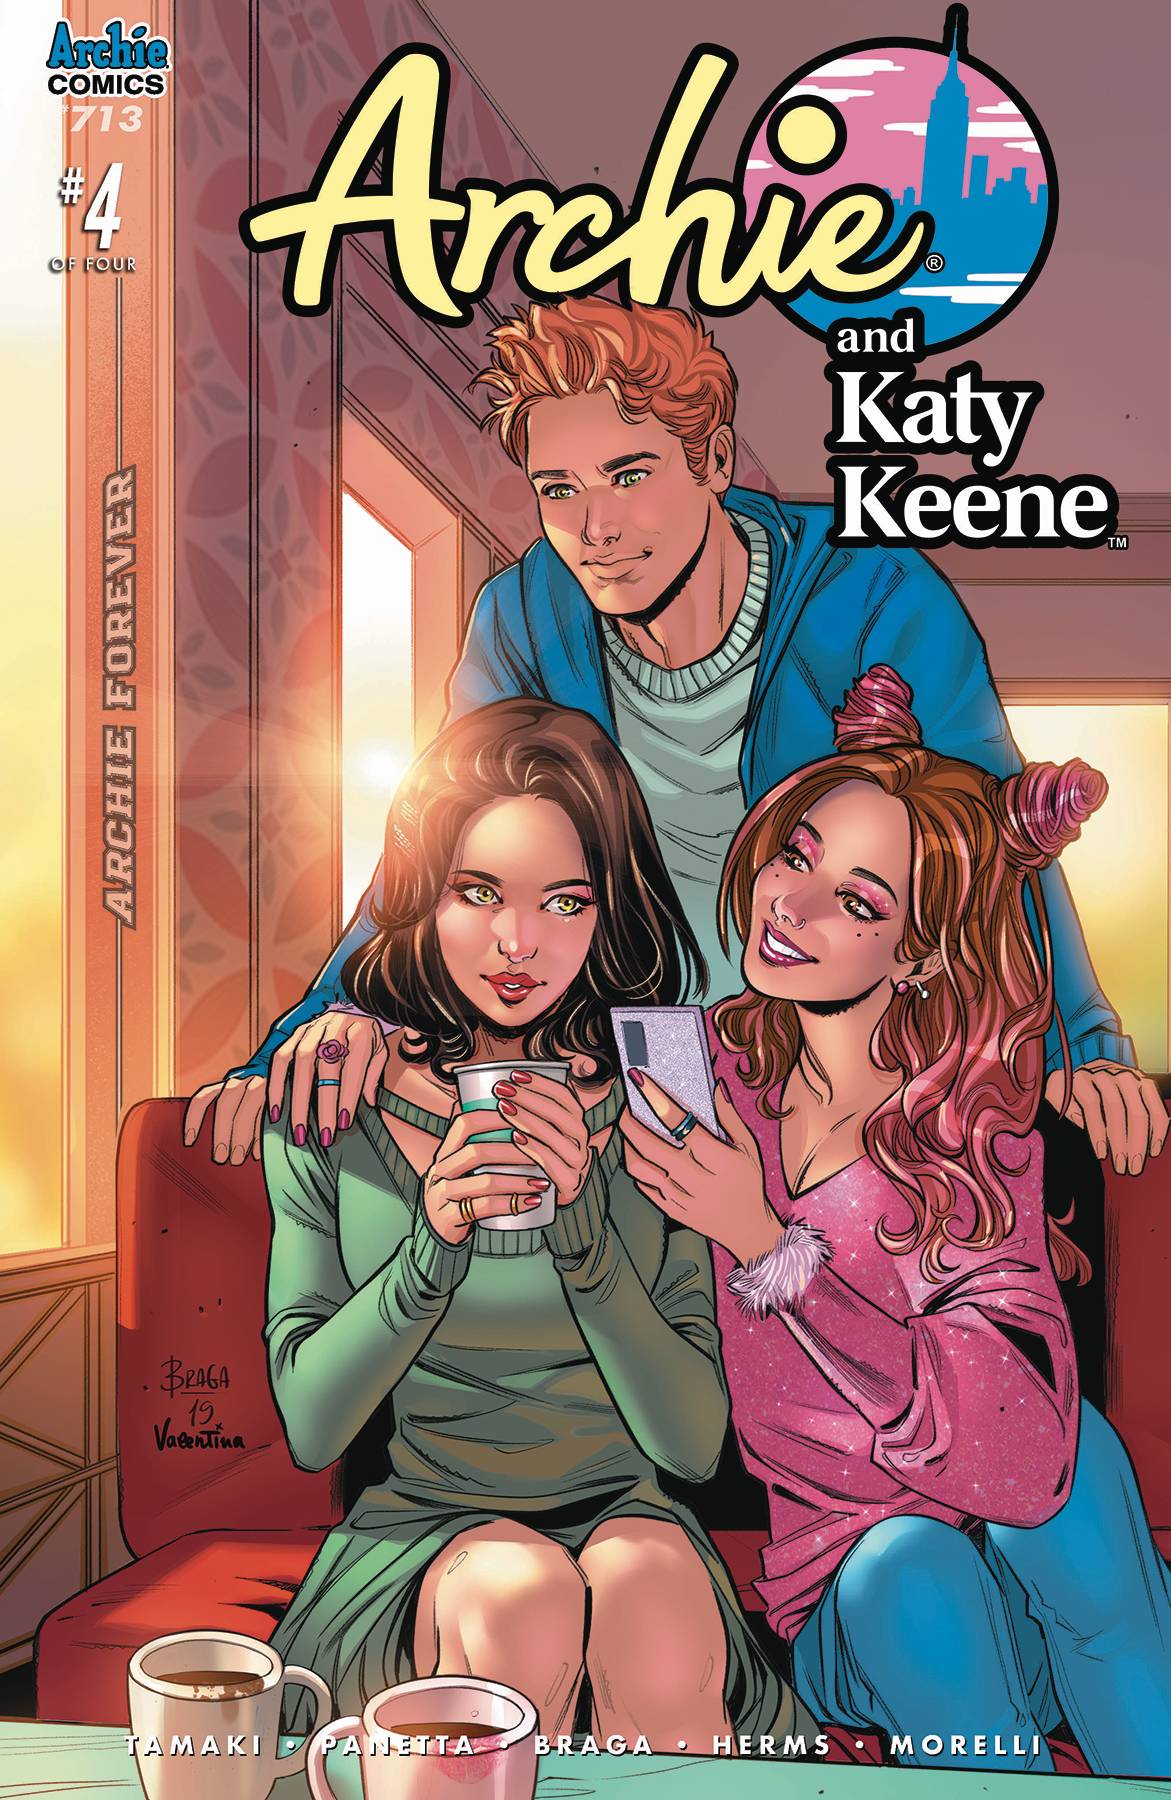 Archie #713 (Archie & Katy Keene Part 4) Cover A Braga